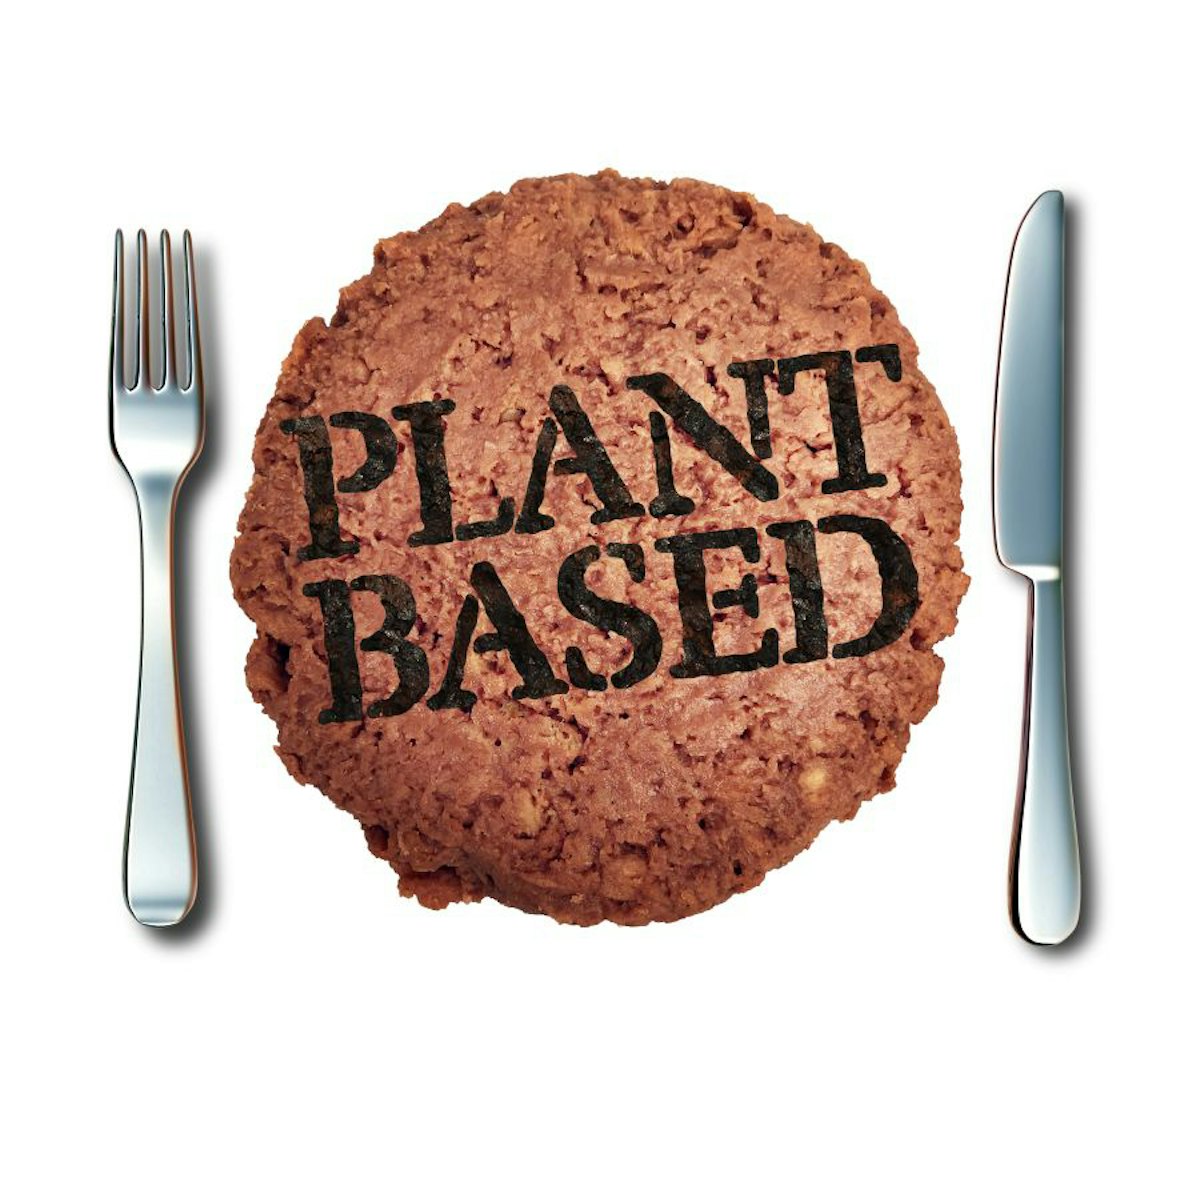 Buy Plant-Based Proteins & Meat Alternatives